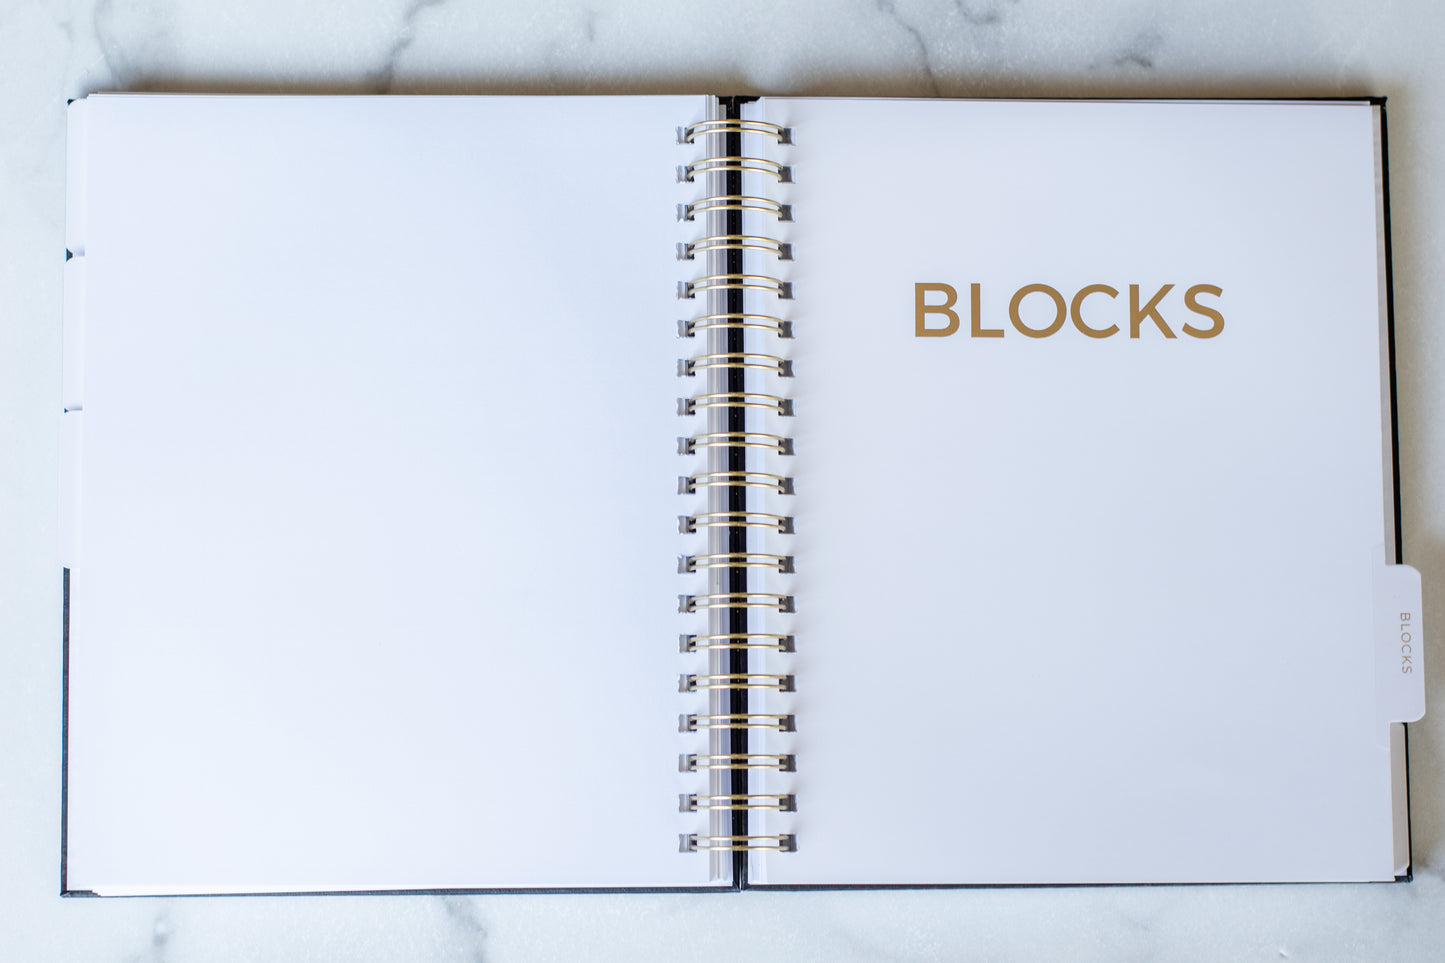 Block Schedule™ Planner | Leather Cover (weekly version)